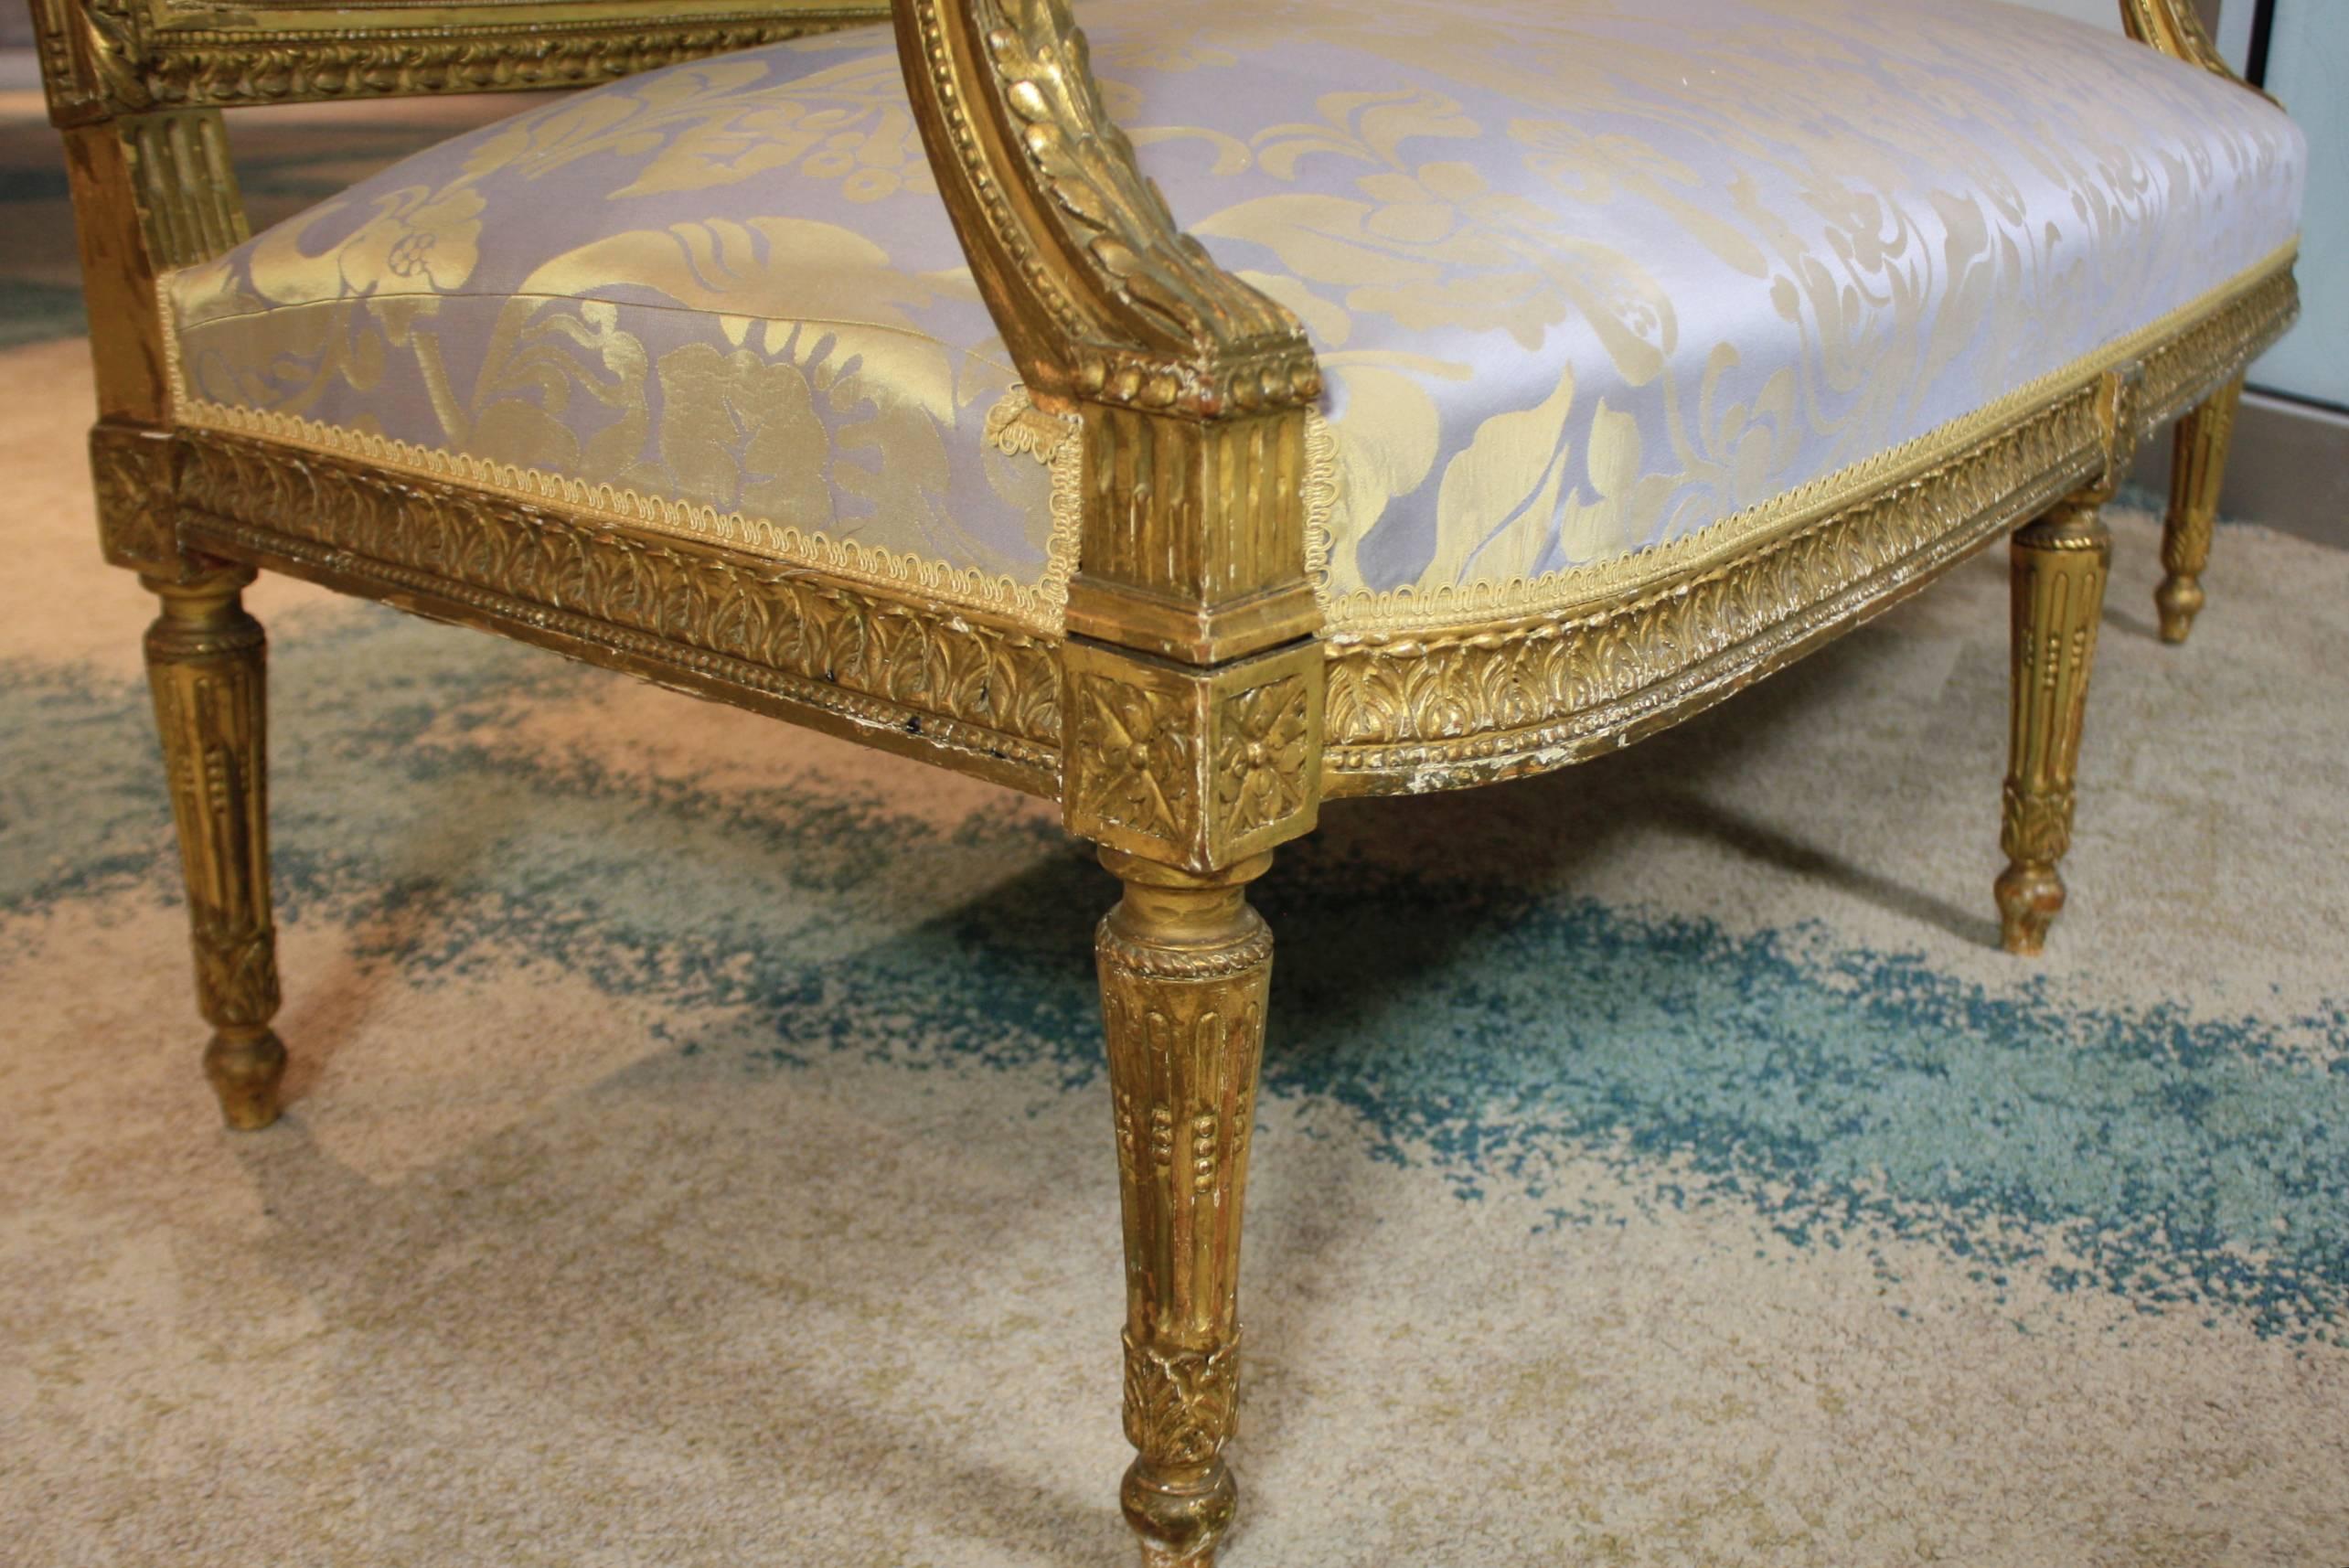 19th Century French Louis XVI Style Giltwood Settee, Sofa or Canape